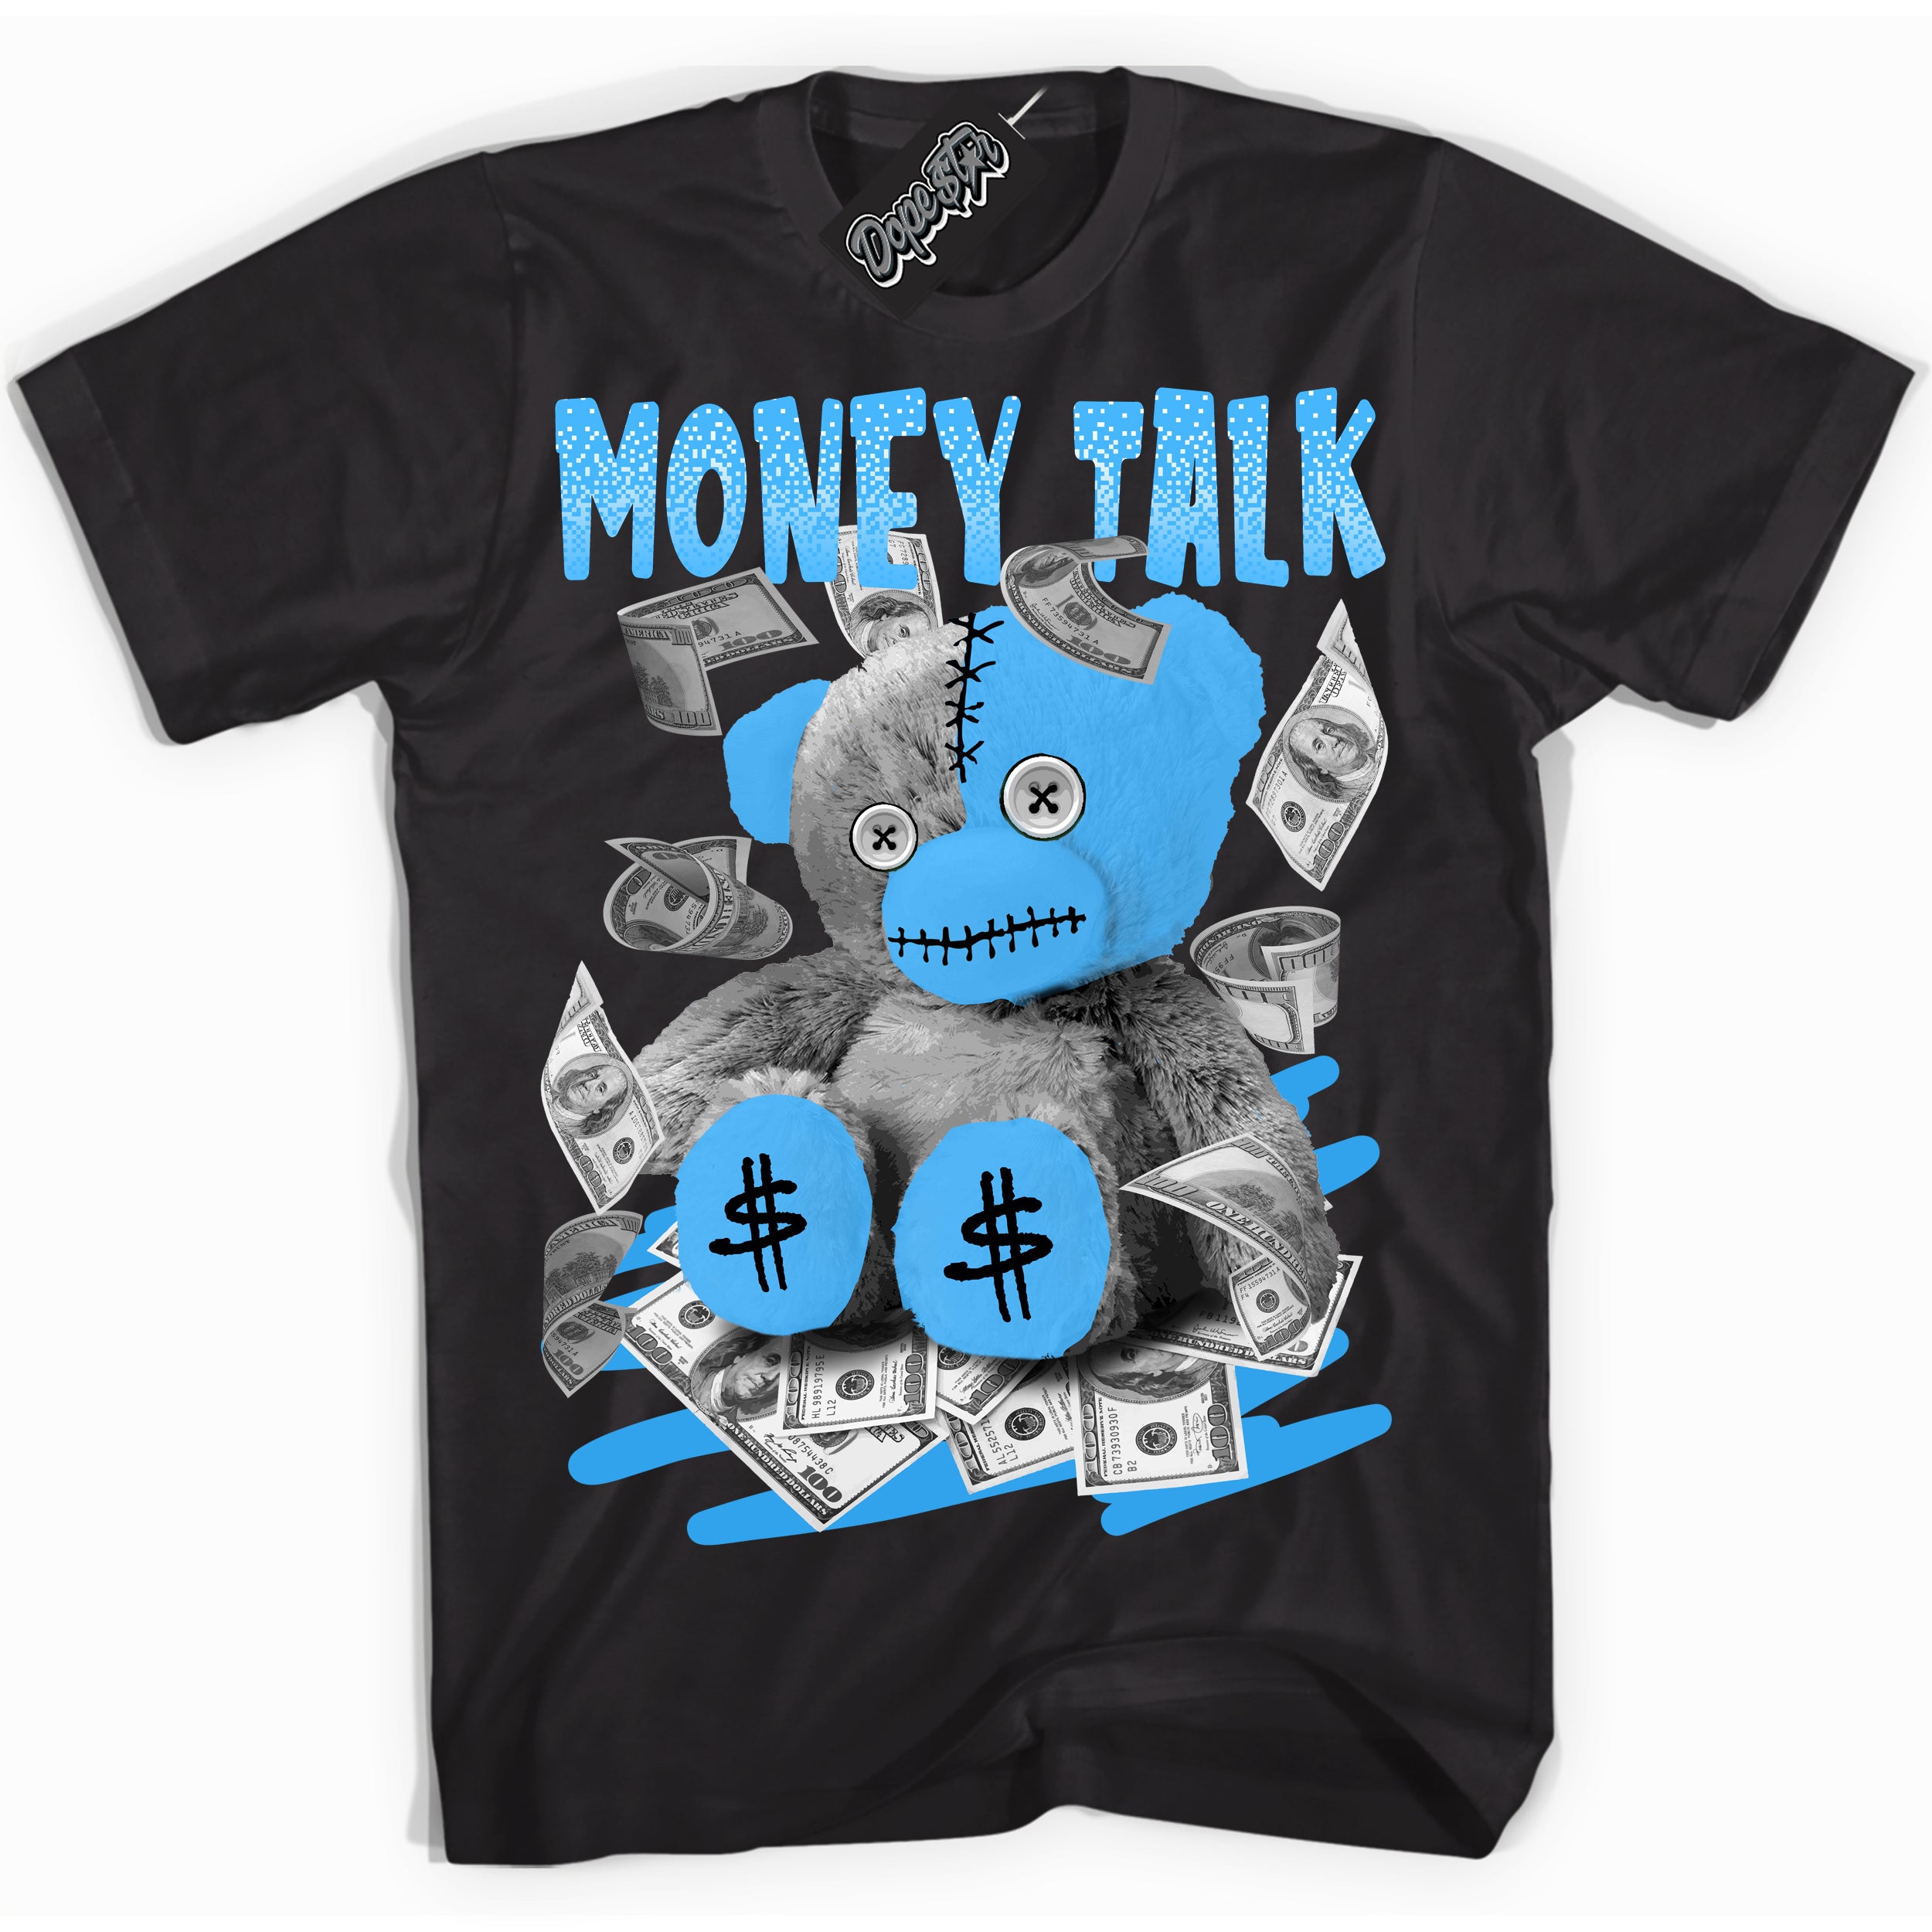 Cool Black graphic tee with “ Money Talk Bear ” design, that perfectly matches Powder Blue 9s sneakers 